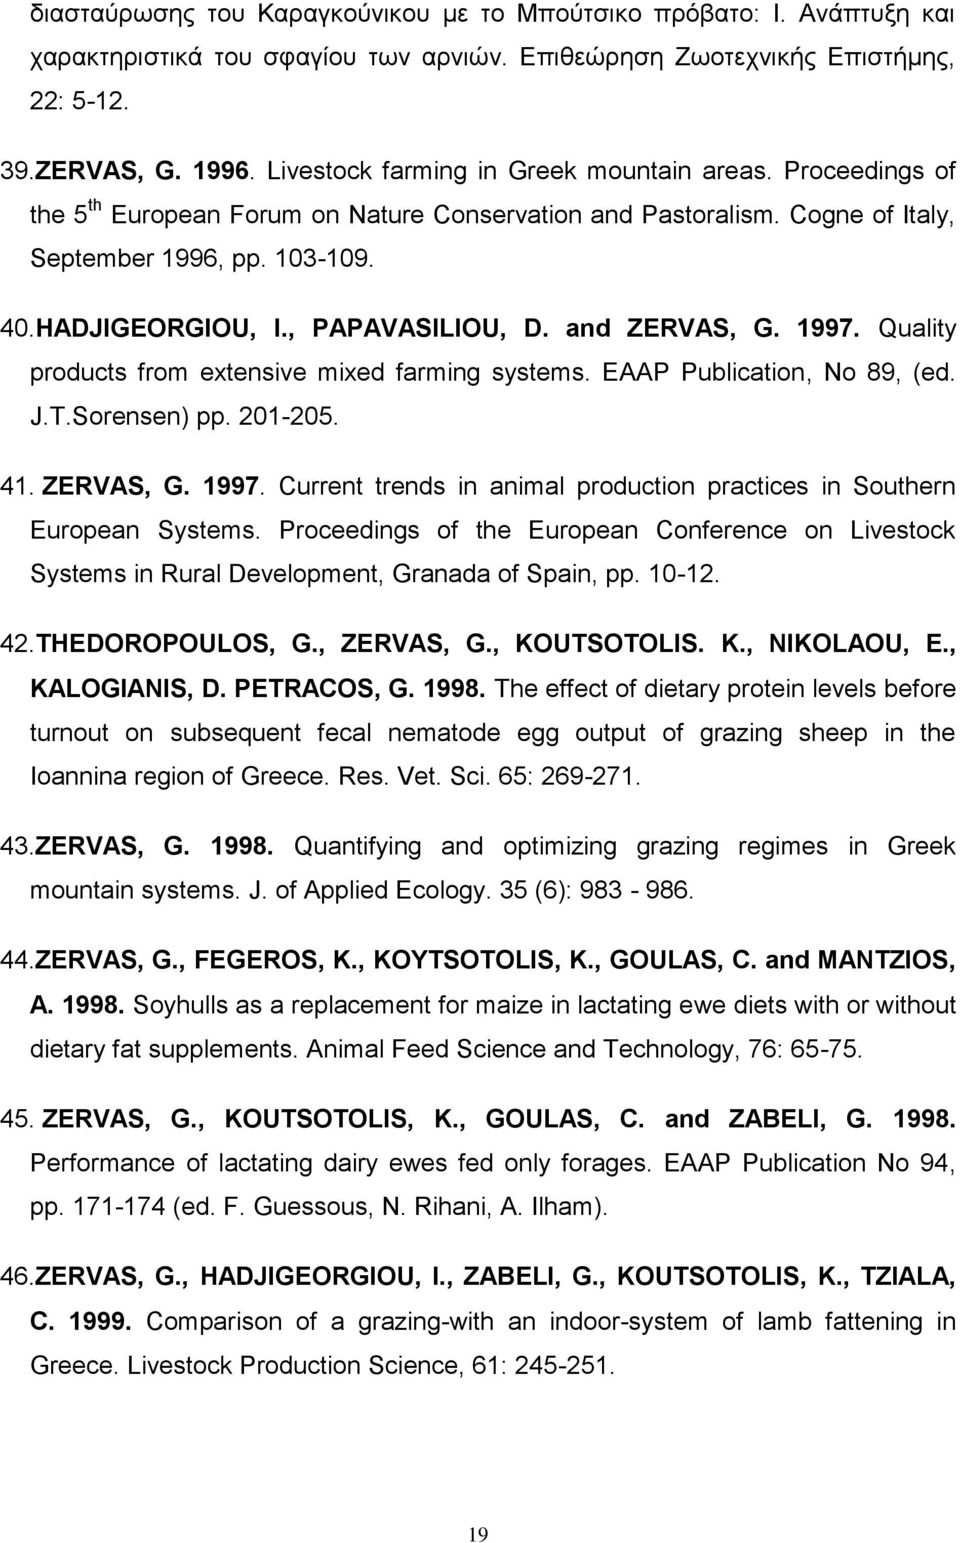 , PAPAVASILIOU, D. and ZERVAS, G. 1997. Quality products from extensive mixed farming systems. EAAP Publication, No 89, (ed. J.T.Sorensen) pp. 201-205. 41. ZERVAS, G. 1997. Current trends in animal production practices in Southern European Systems.